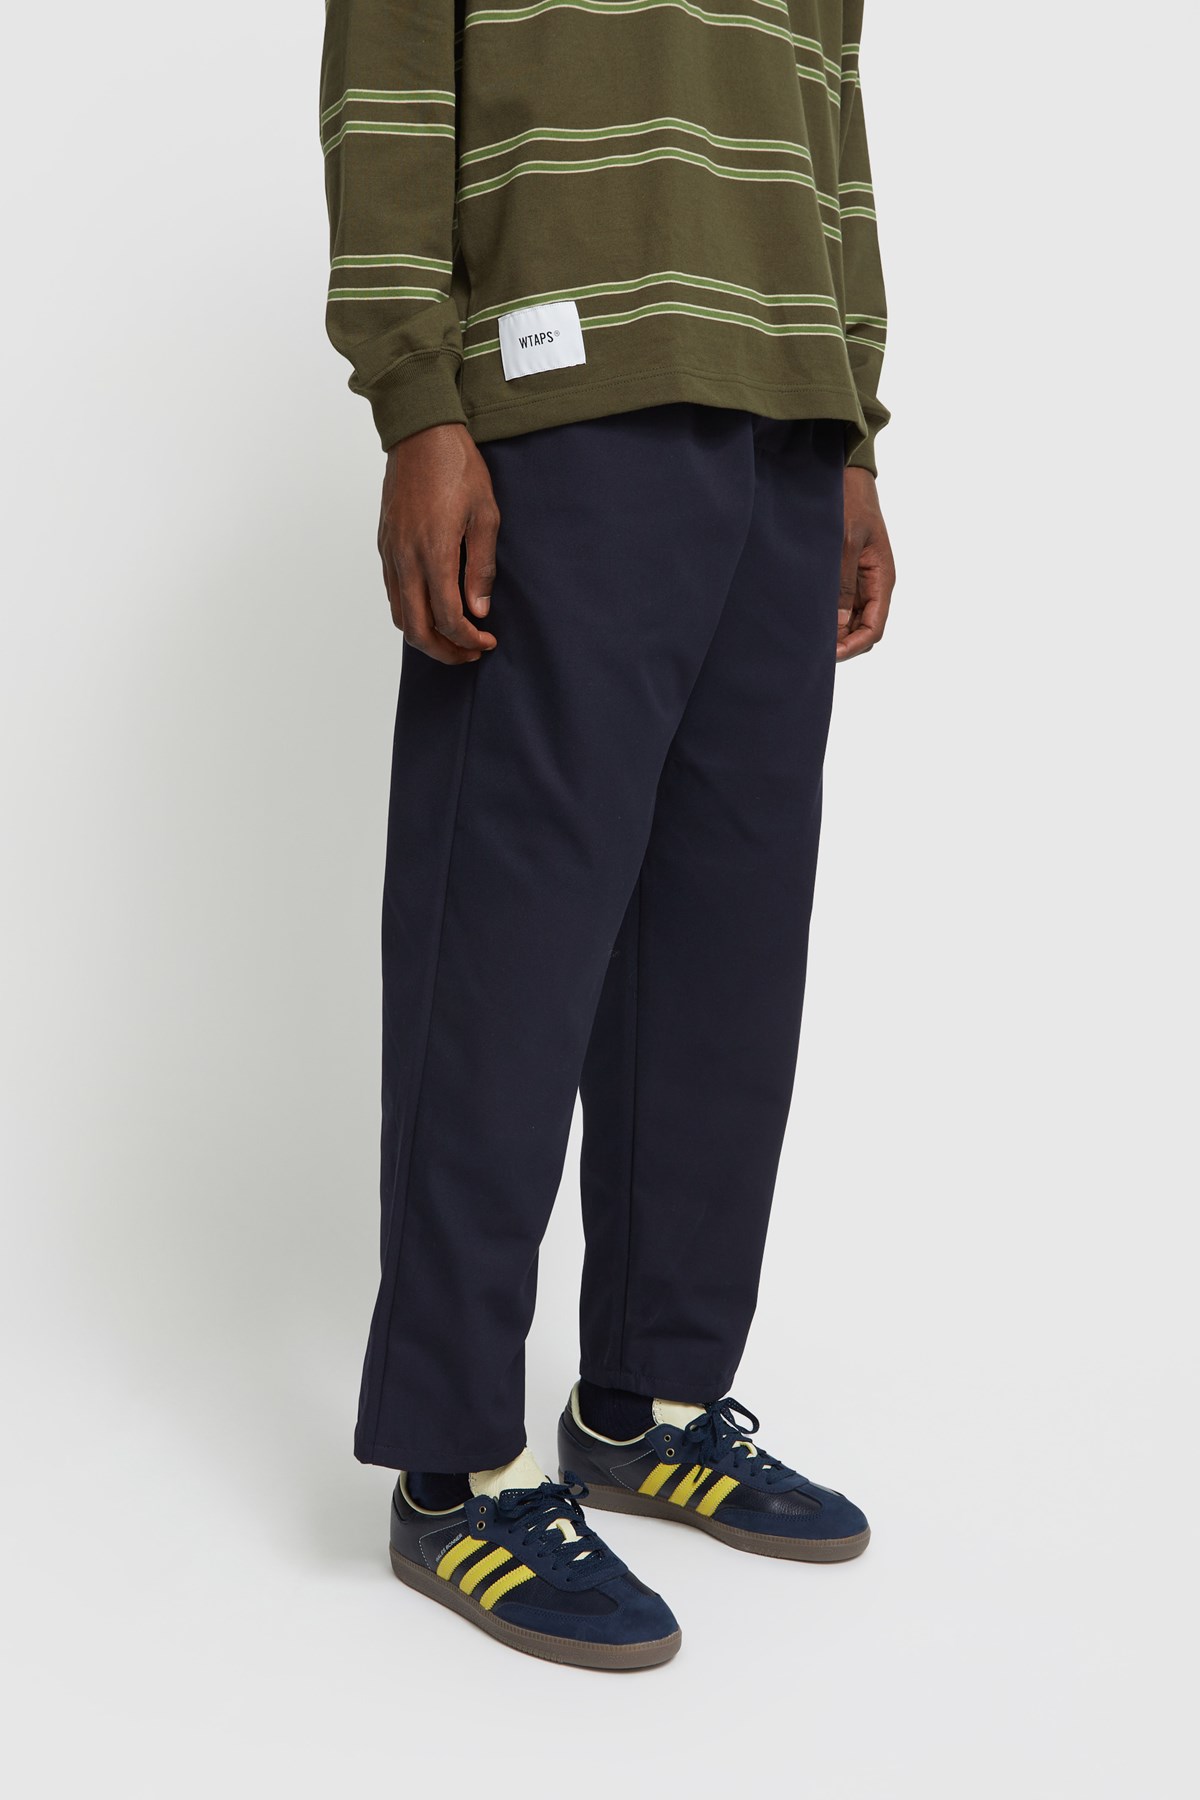 22ss WTAPS SEAGULL 02 TROUSERS TRACKS-